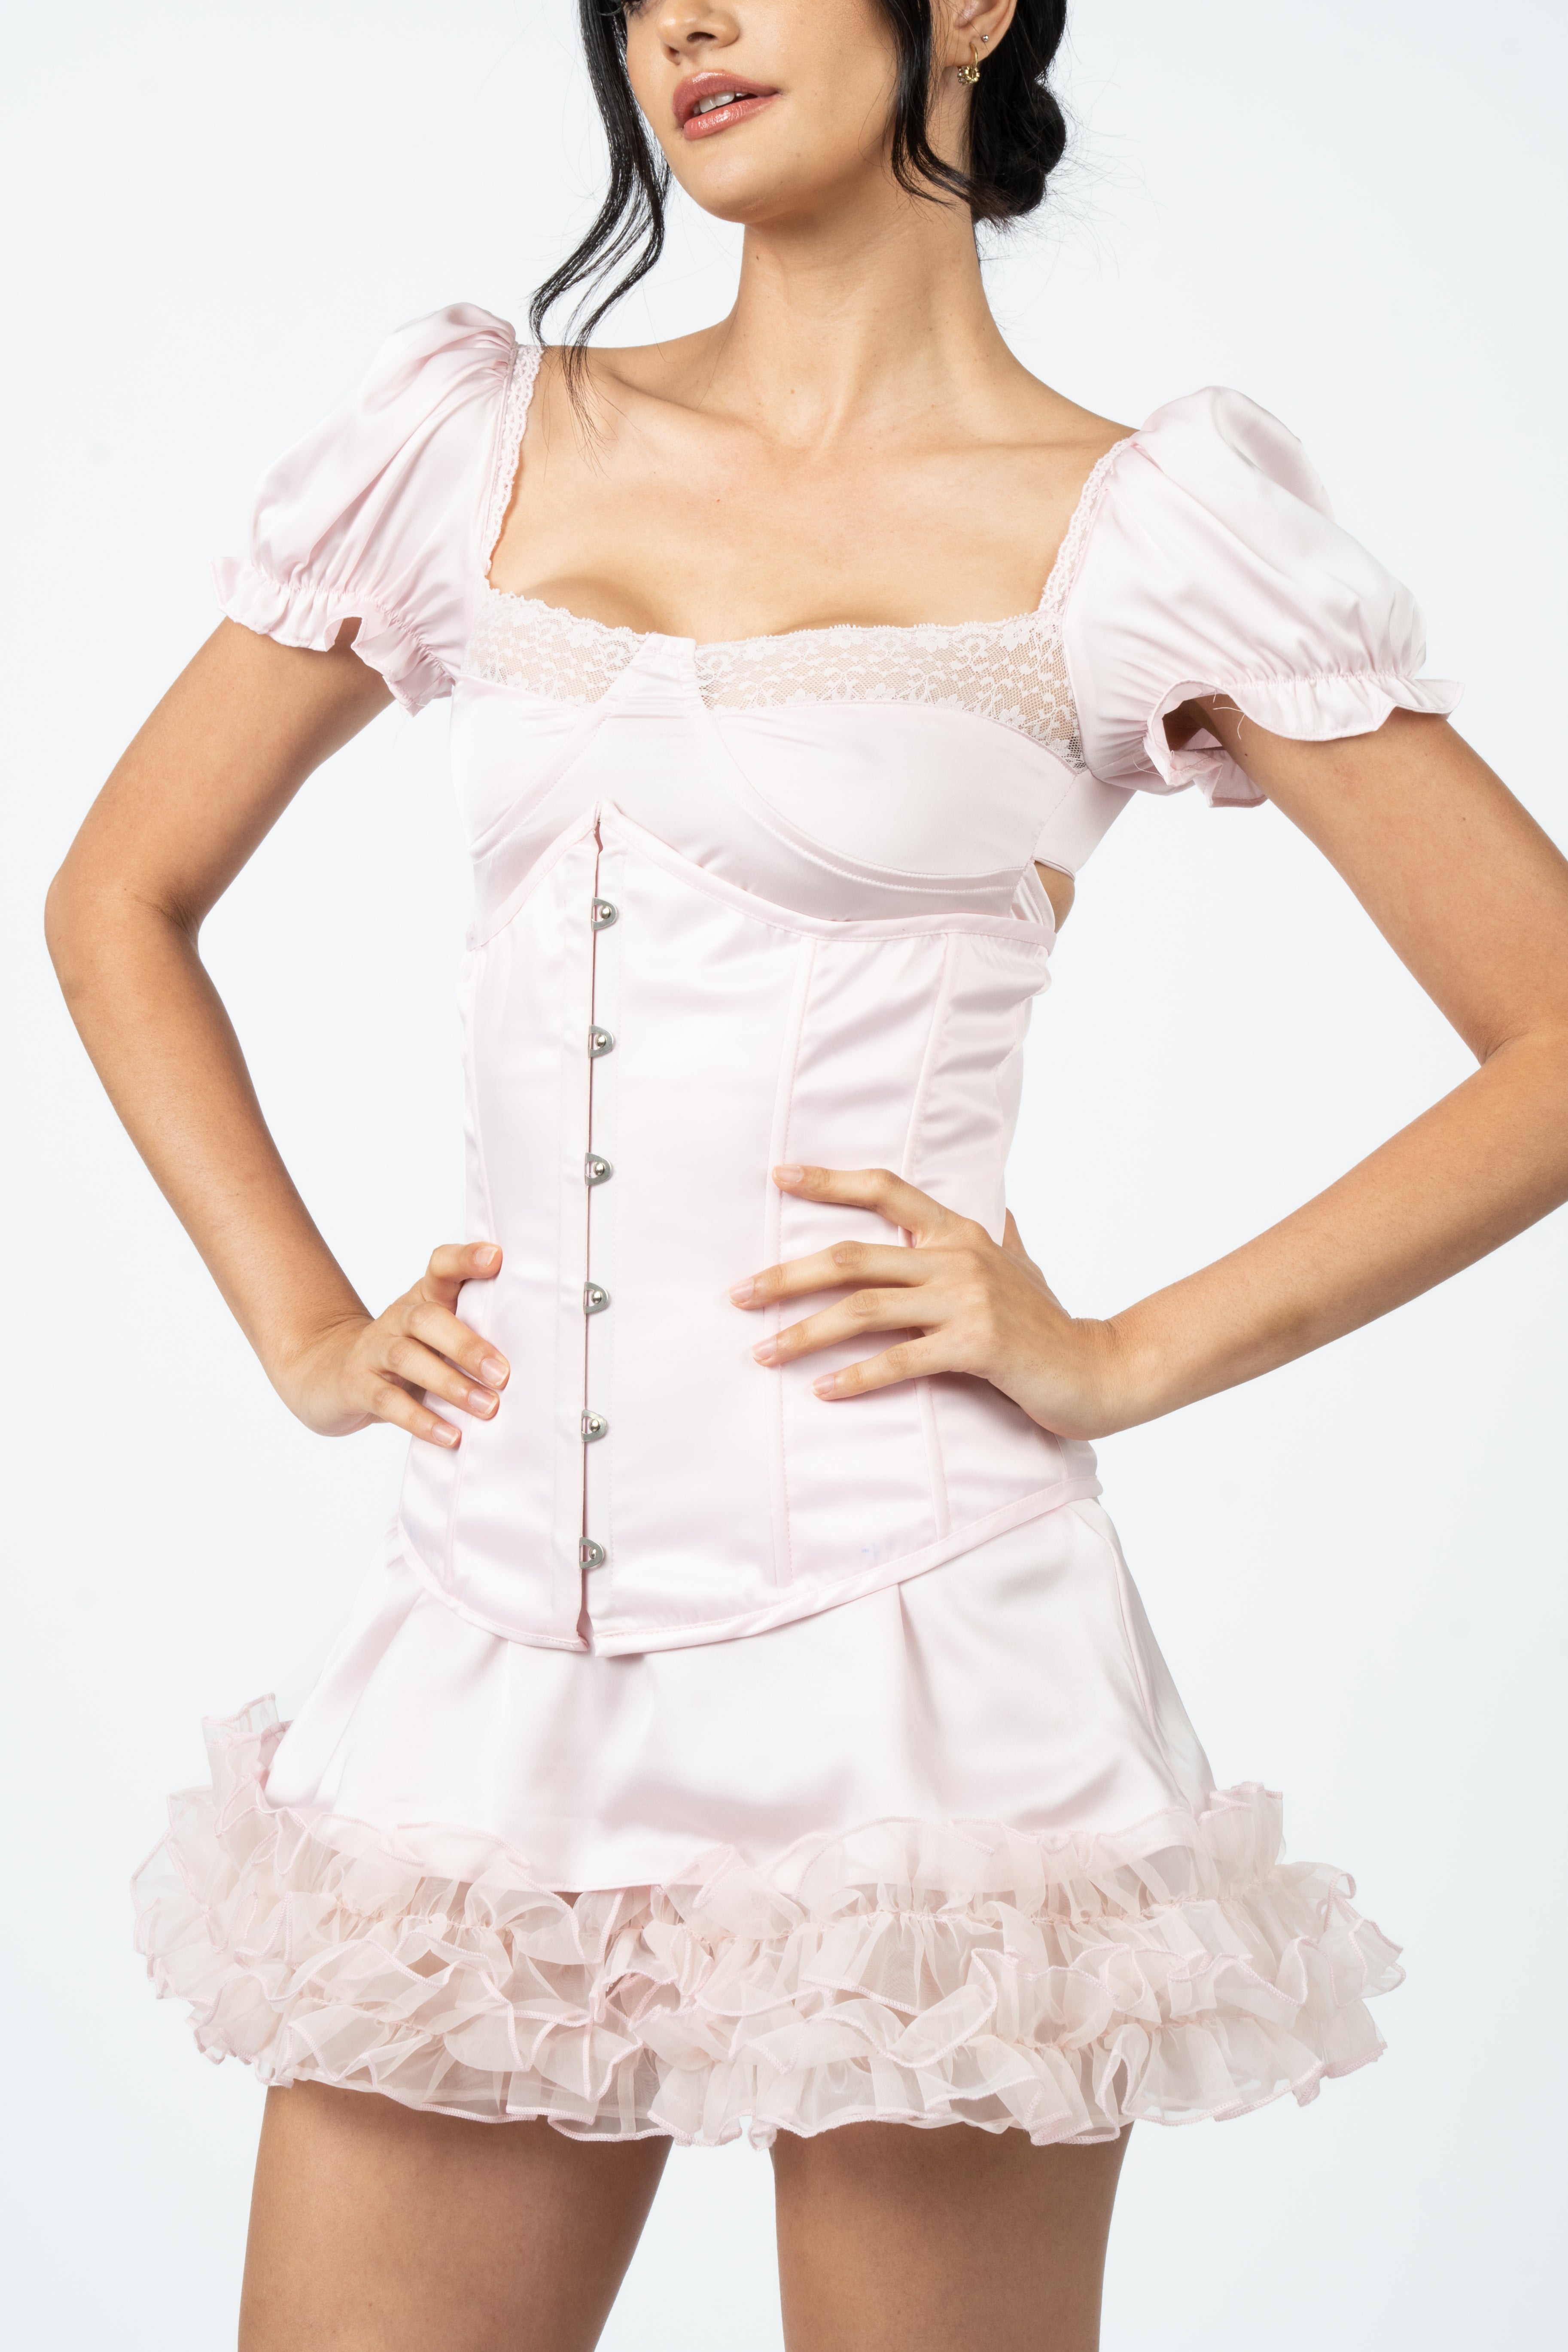 The To Die For Corset - Ballerina Pink